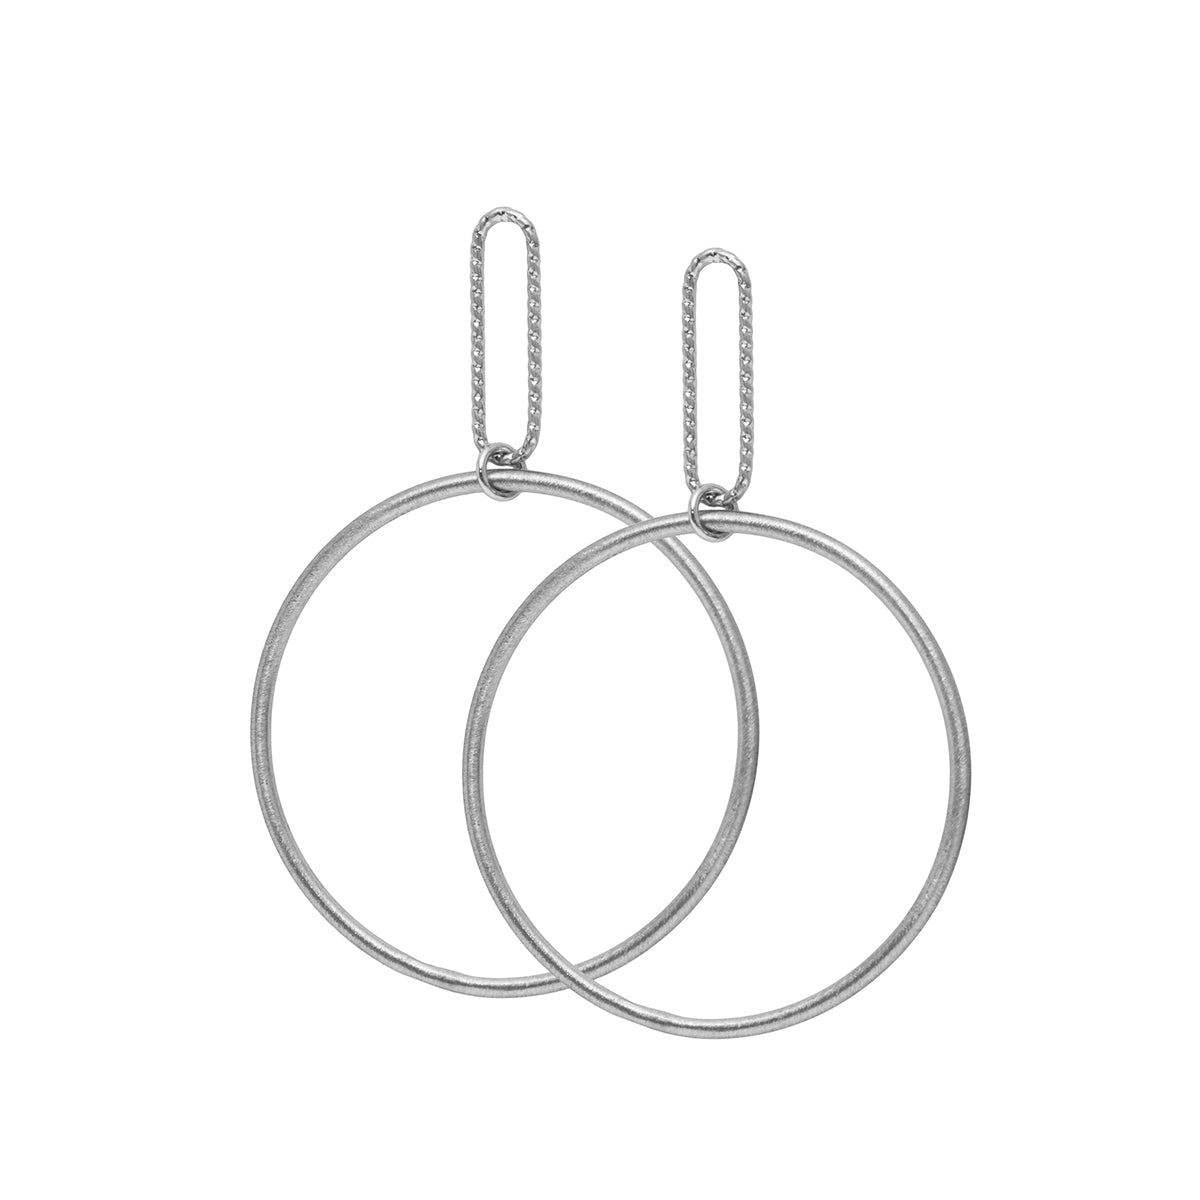 Dansk - Alyssa round earrings, silver colour ion platinum with surgical steel 6x4 cm